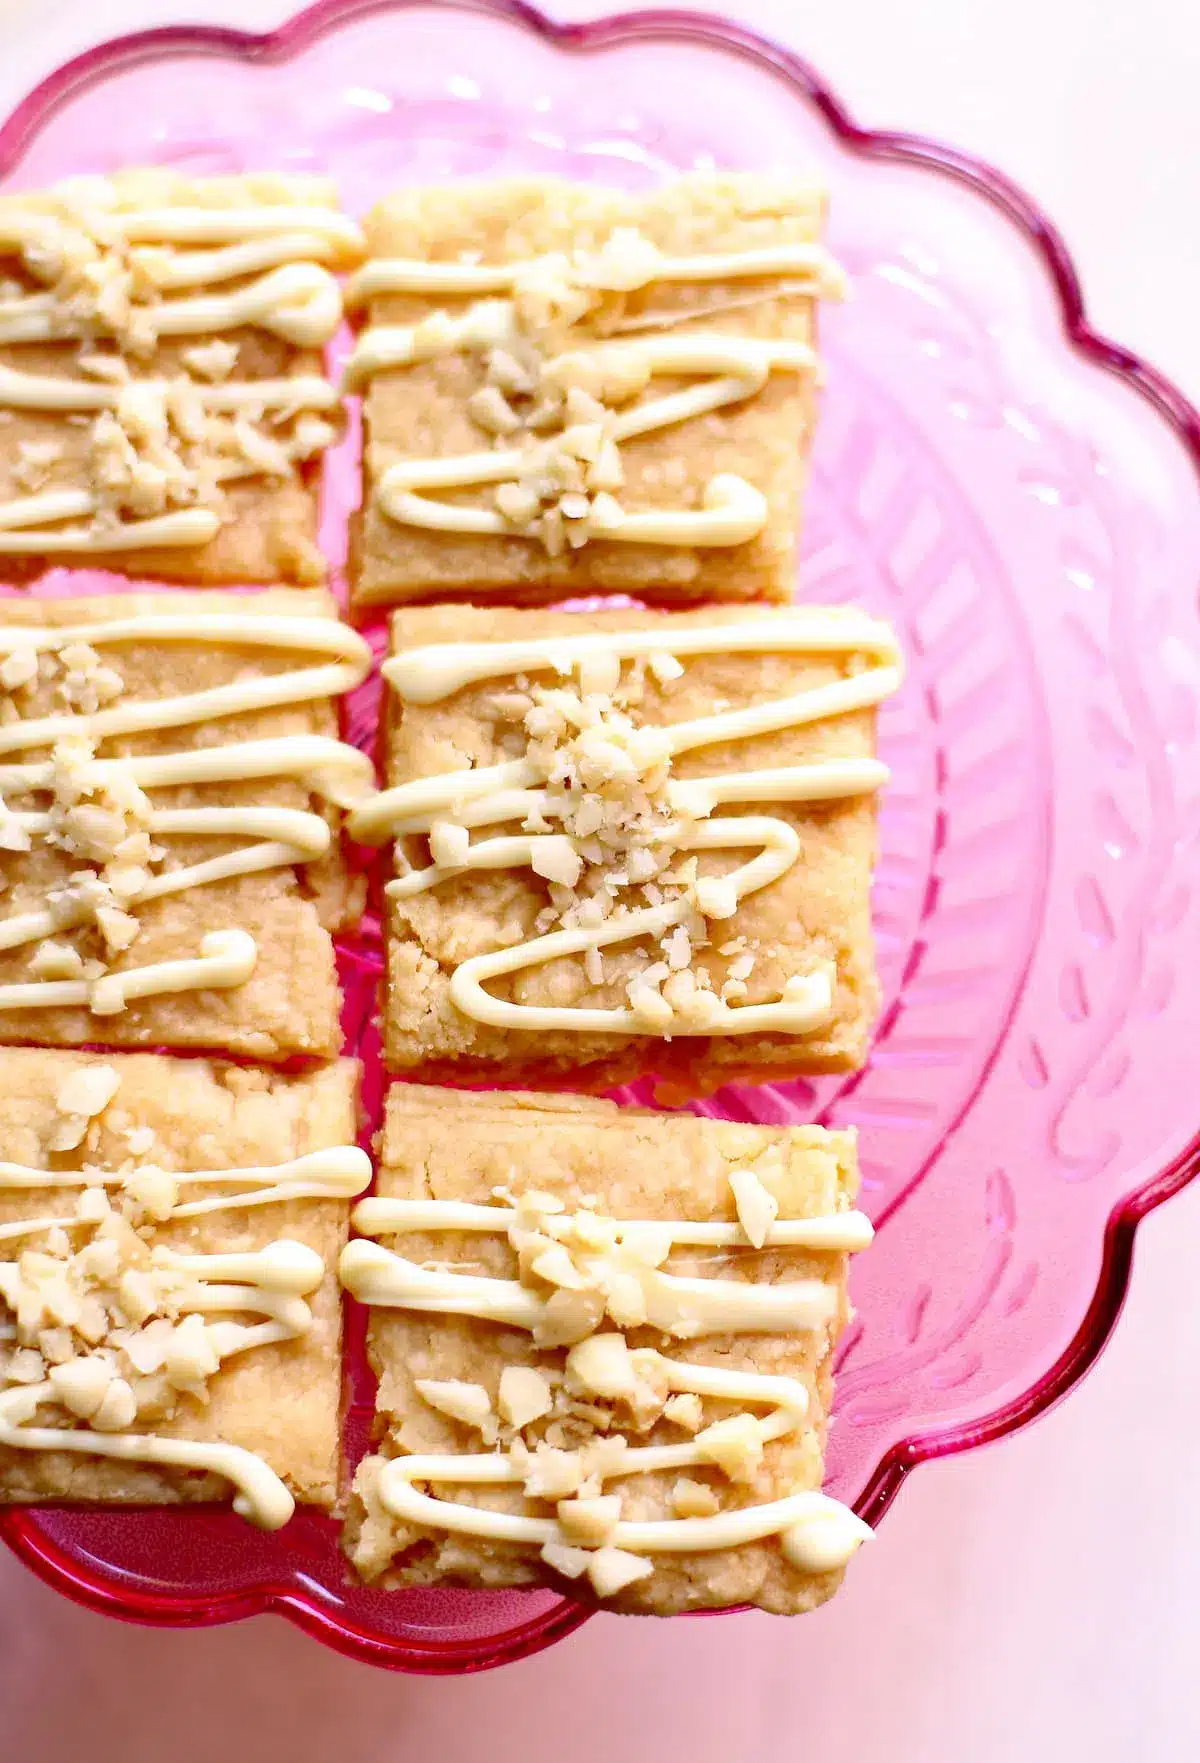 Macadamia nut shortbread cookies on a pink plate.